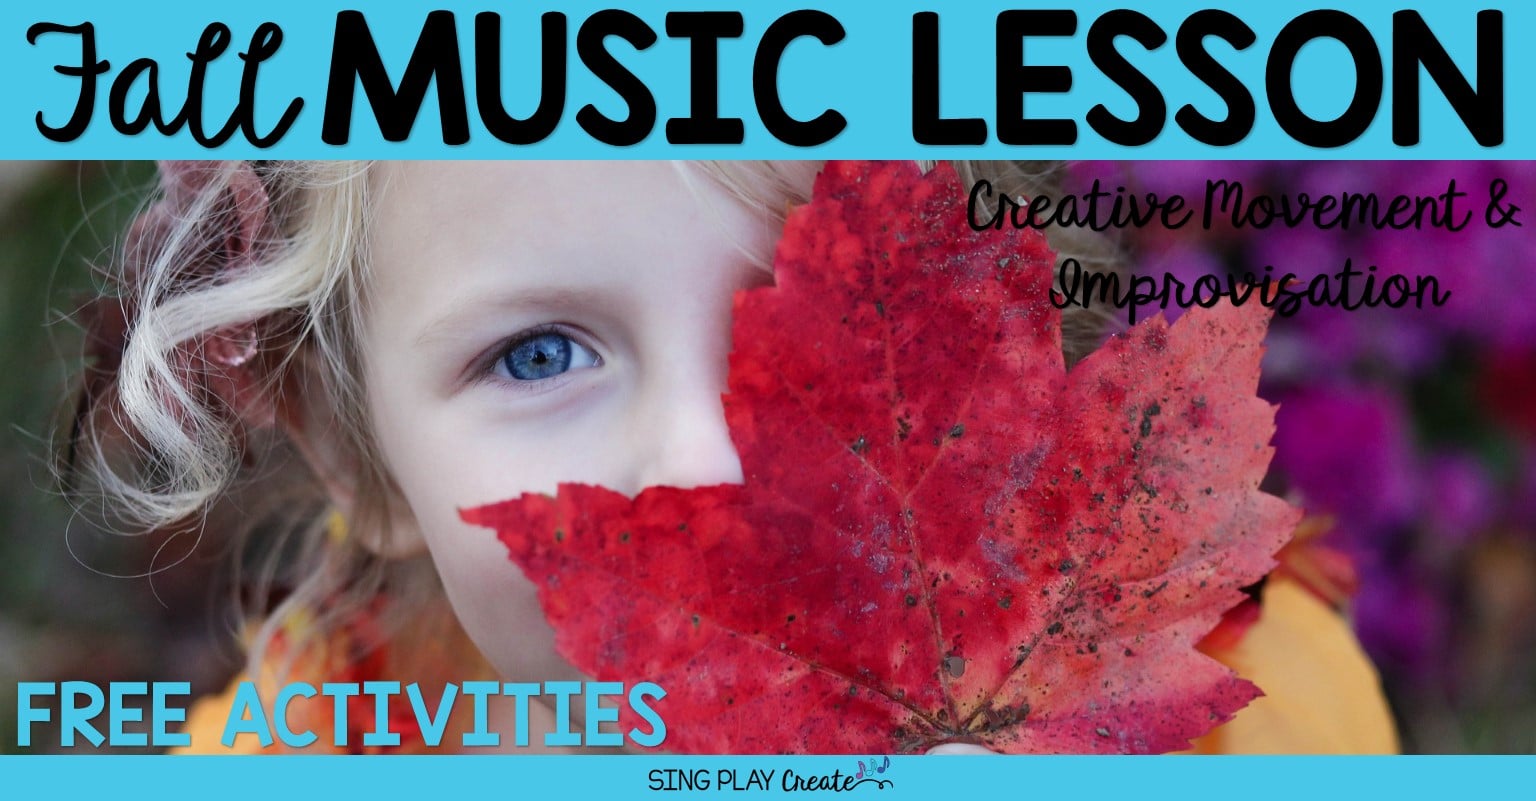 You are currently viewing Fall Music Lesson: Creative Movement and Improvisation